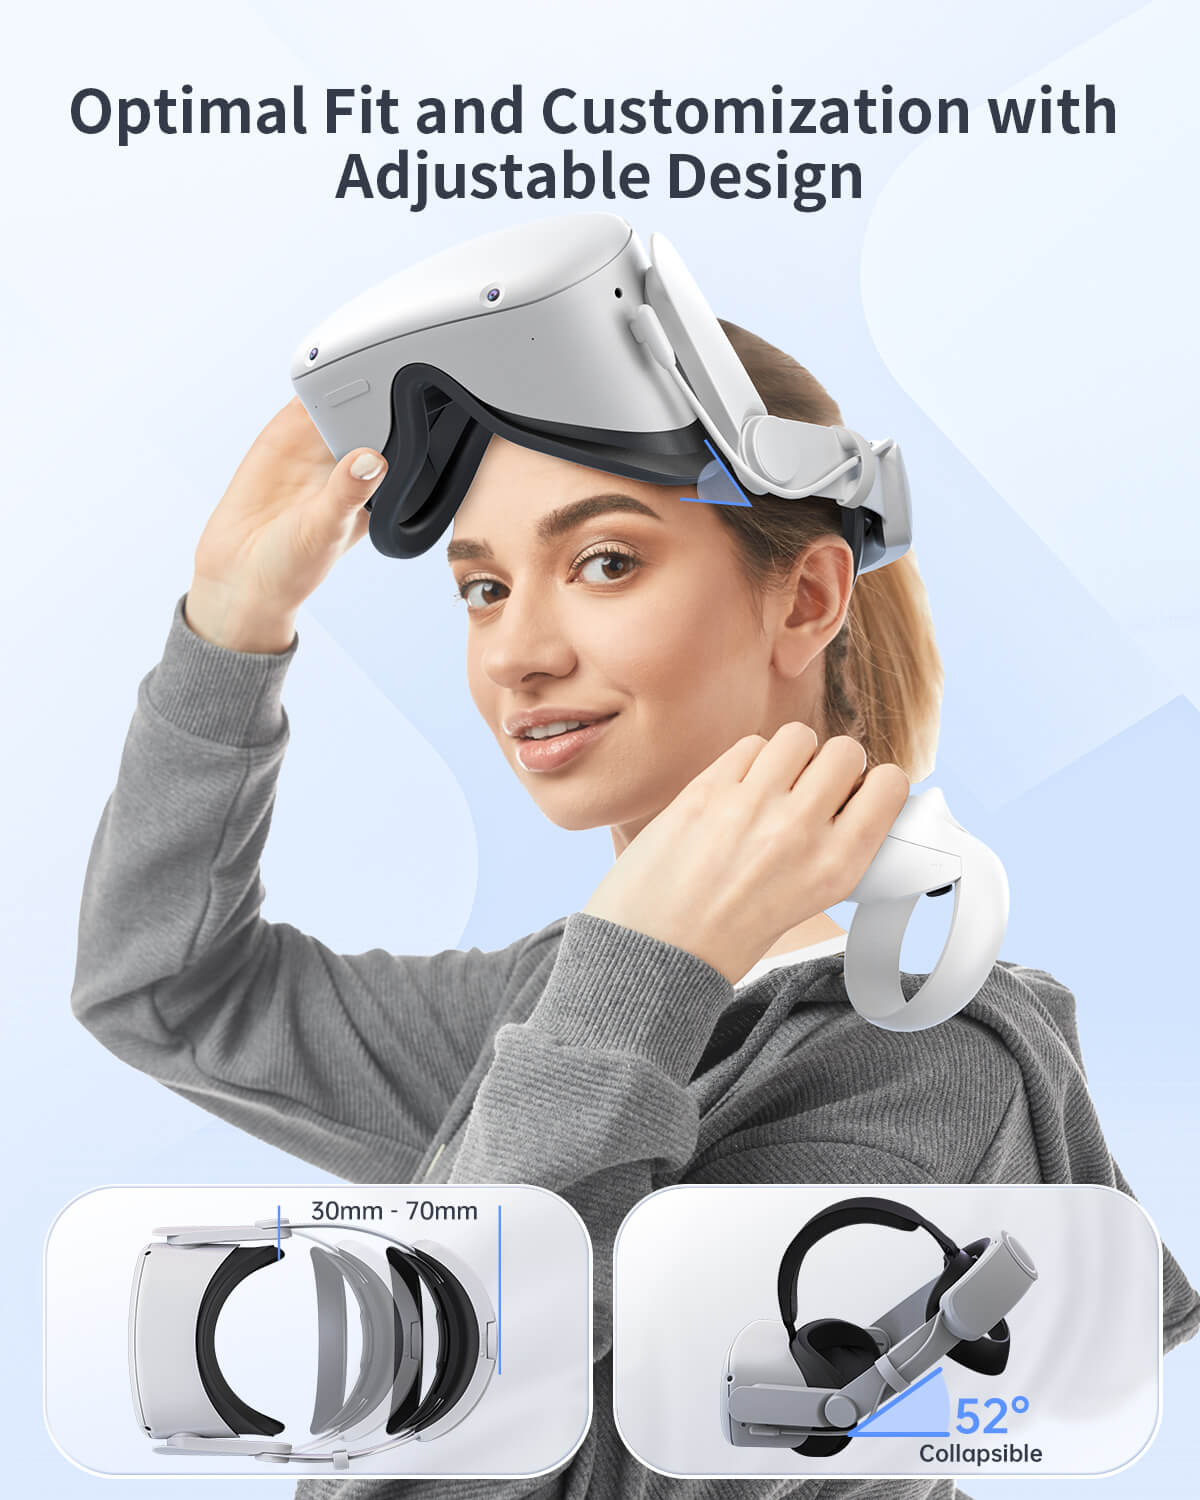 Quest 2 Headstrap KIWI Design with battery, VR Expert